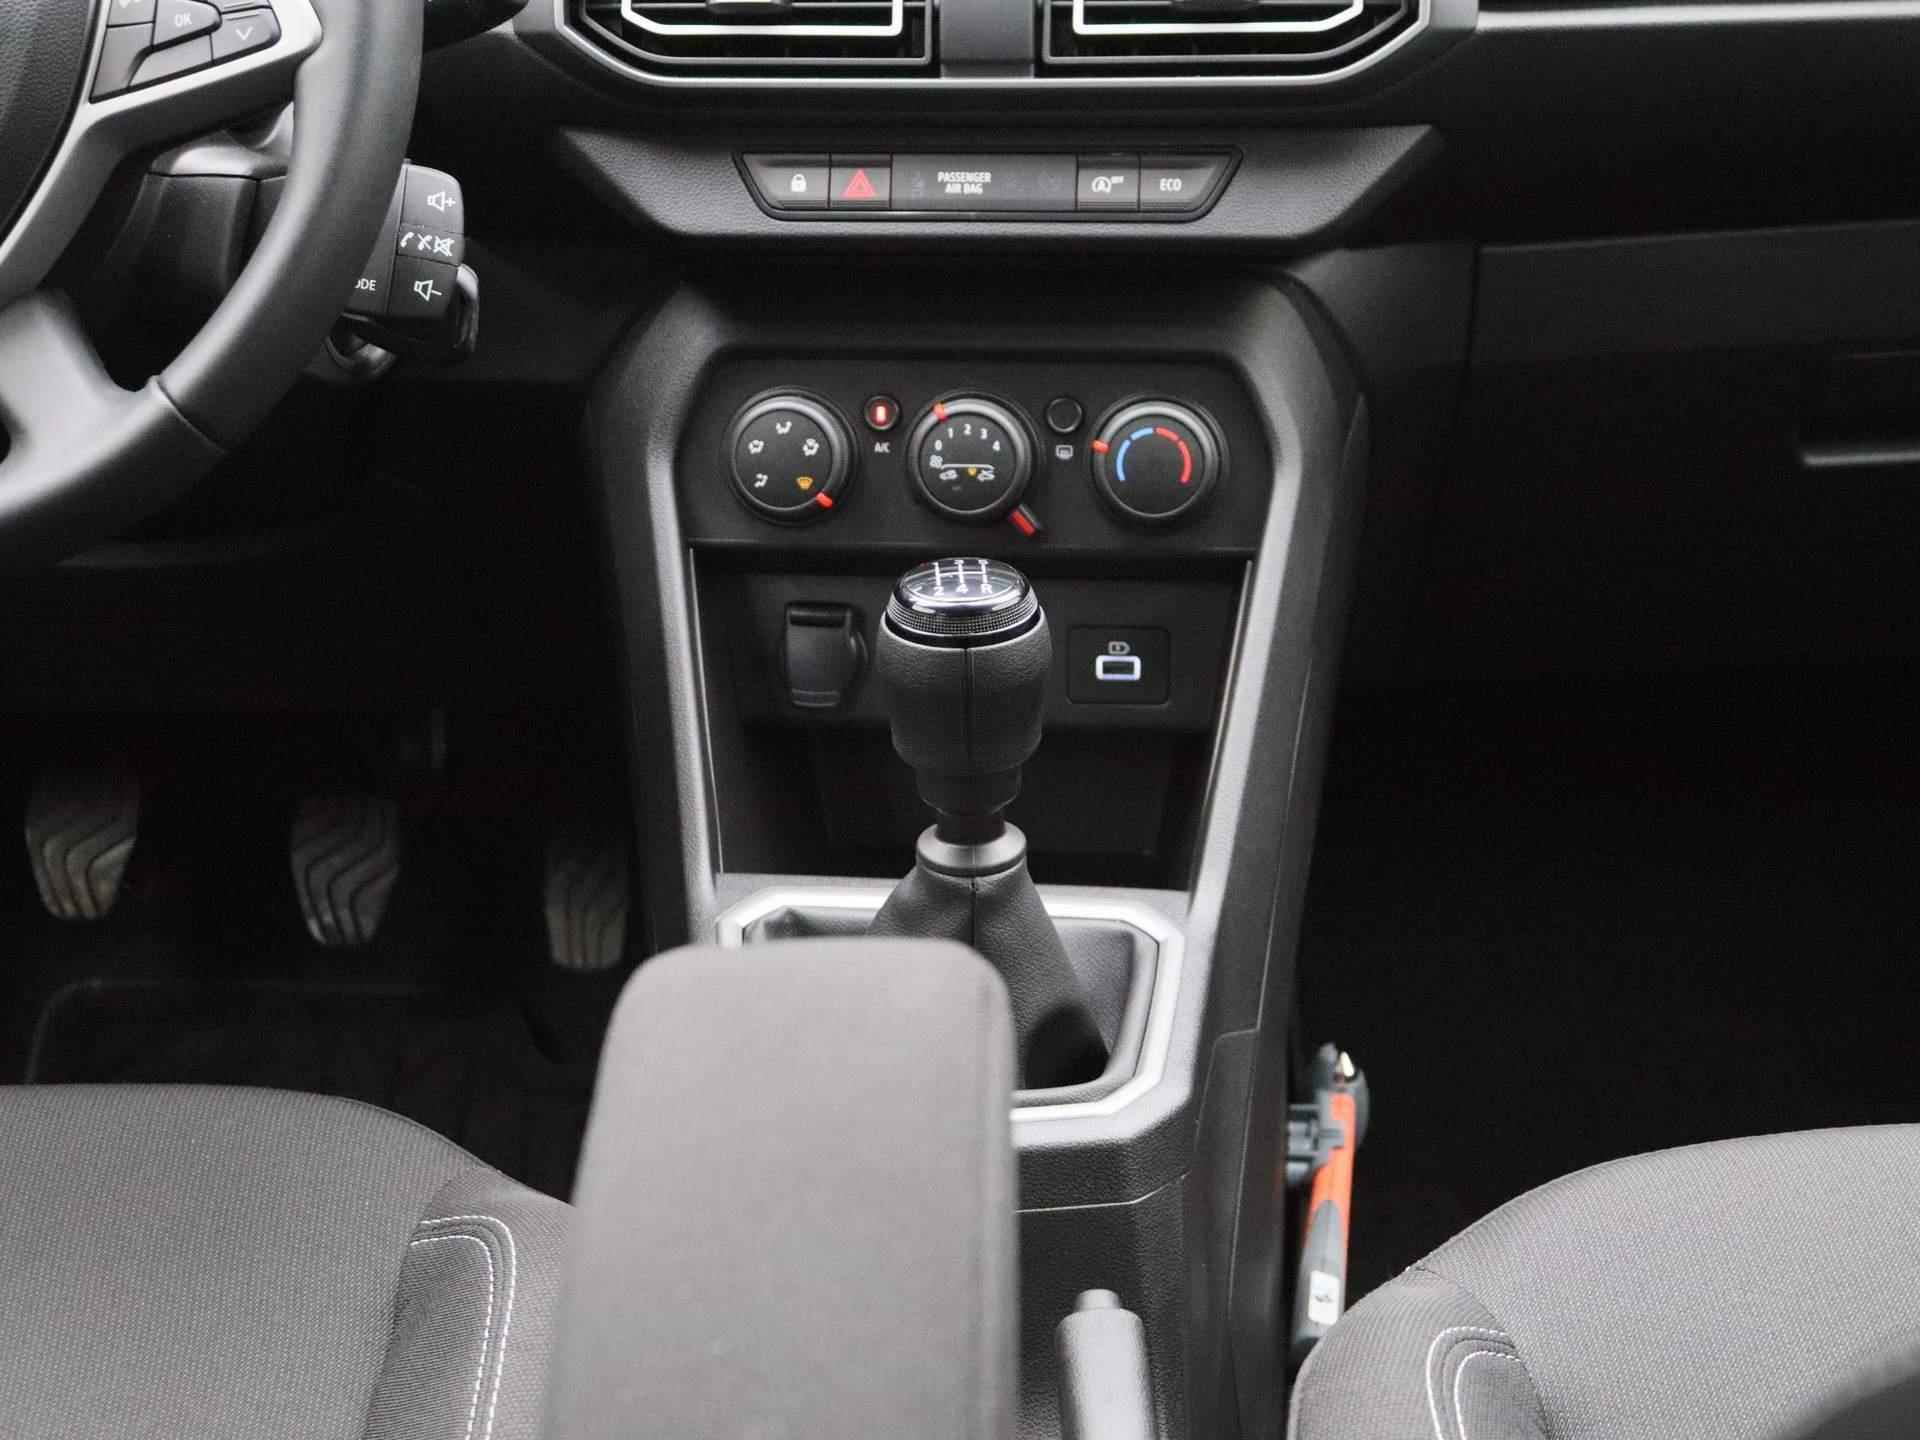 Dacia Sandero 1.0 TCe 90 Expression | Pack MediaNav | PDC Achter | LED-verlichting | Licht- en regensensor | Airconditioning | Apple Carplay & Android Auto - 10/34